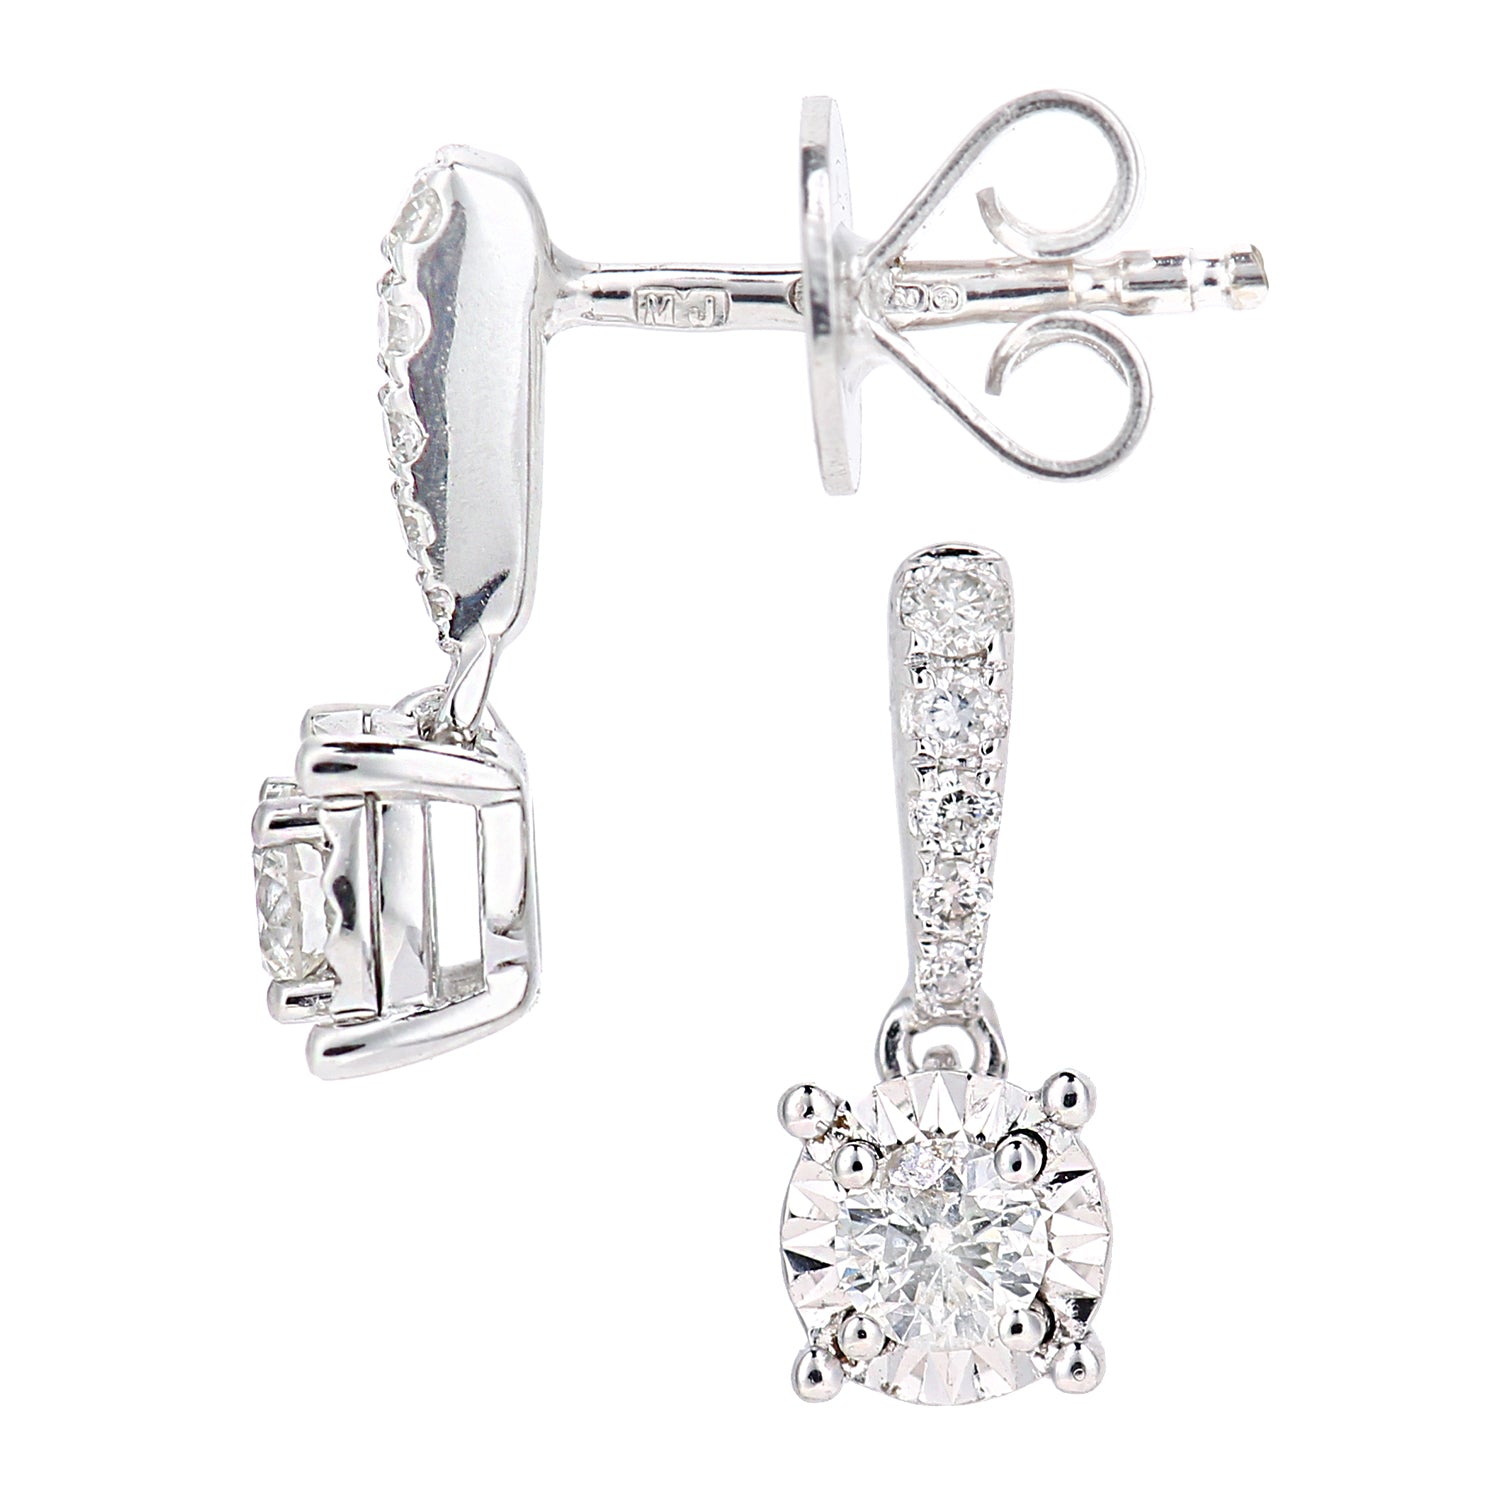 18ct White Gold  Round 18pts Diamond 7pts Solitaire Drop Earrings - PE0AXL5747W18